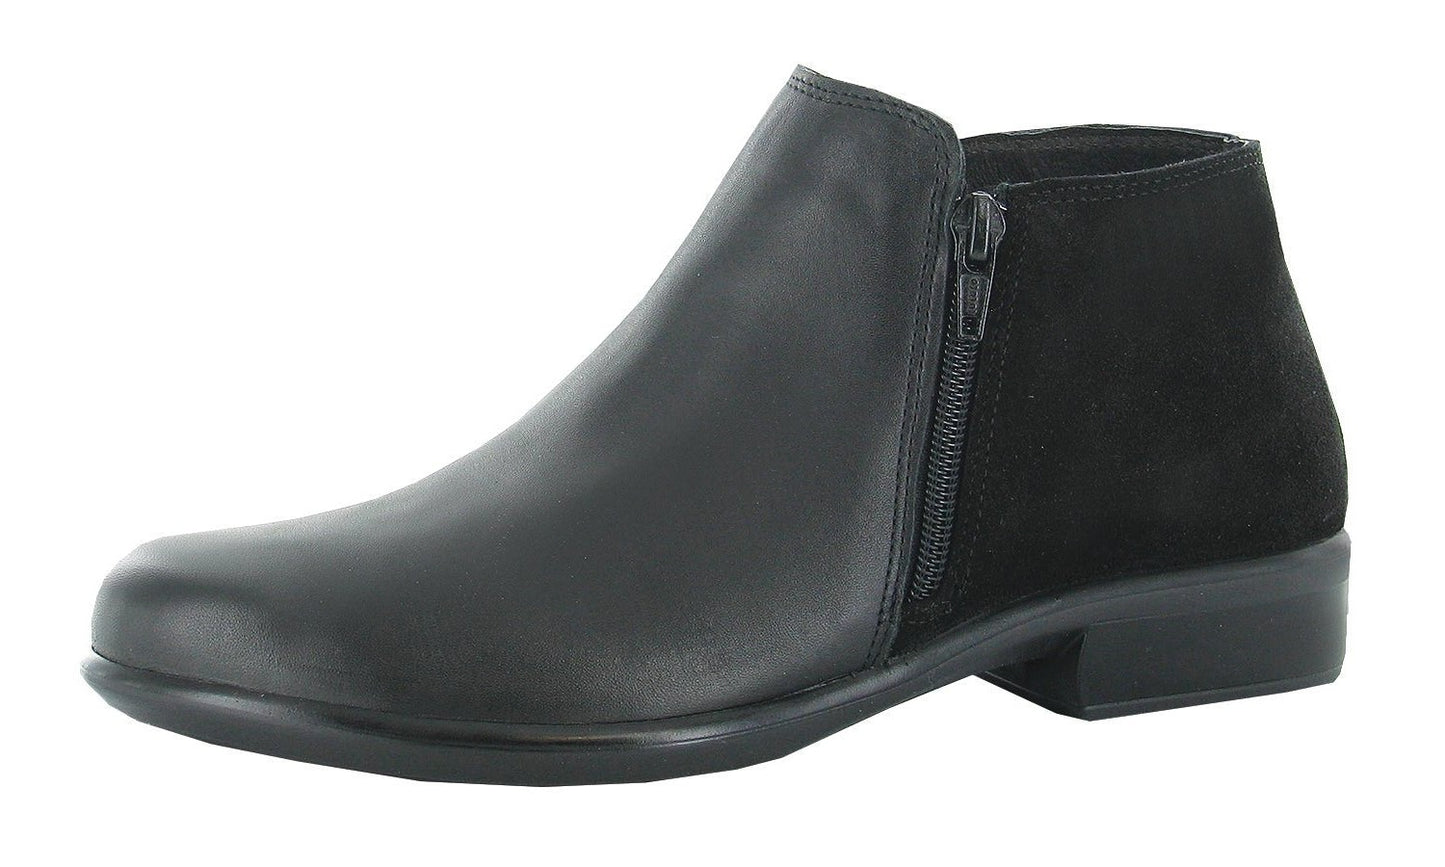 Helm | Black Raven Leather/Black Suede - Boot - Naot